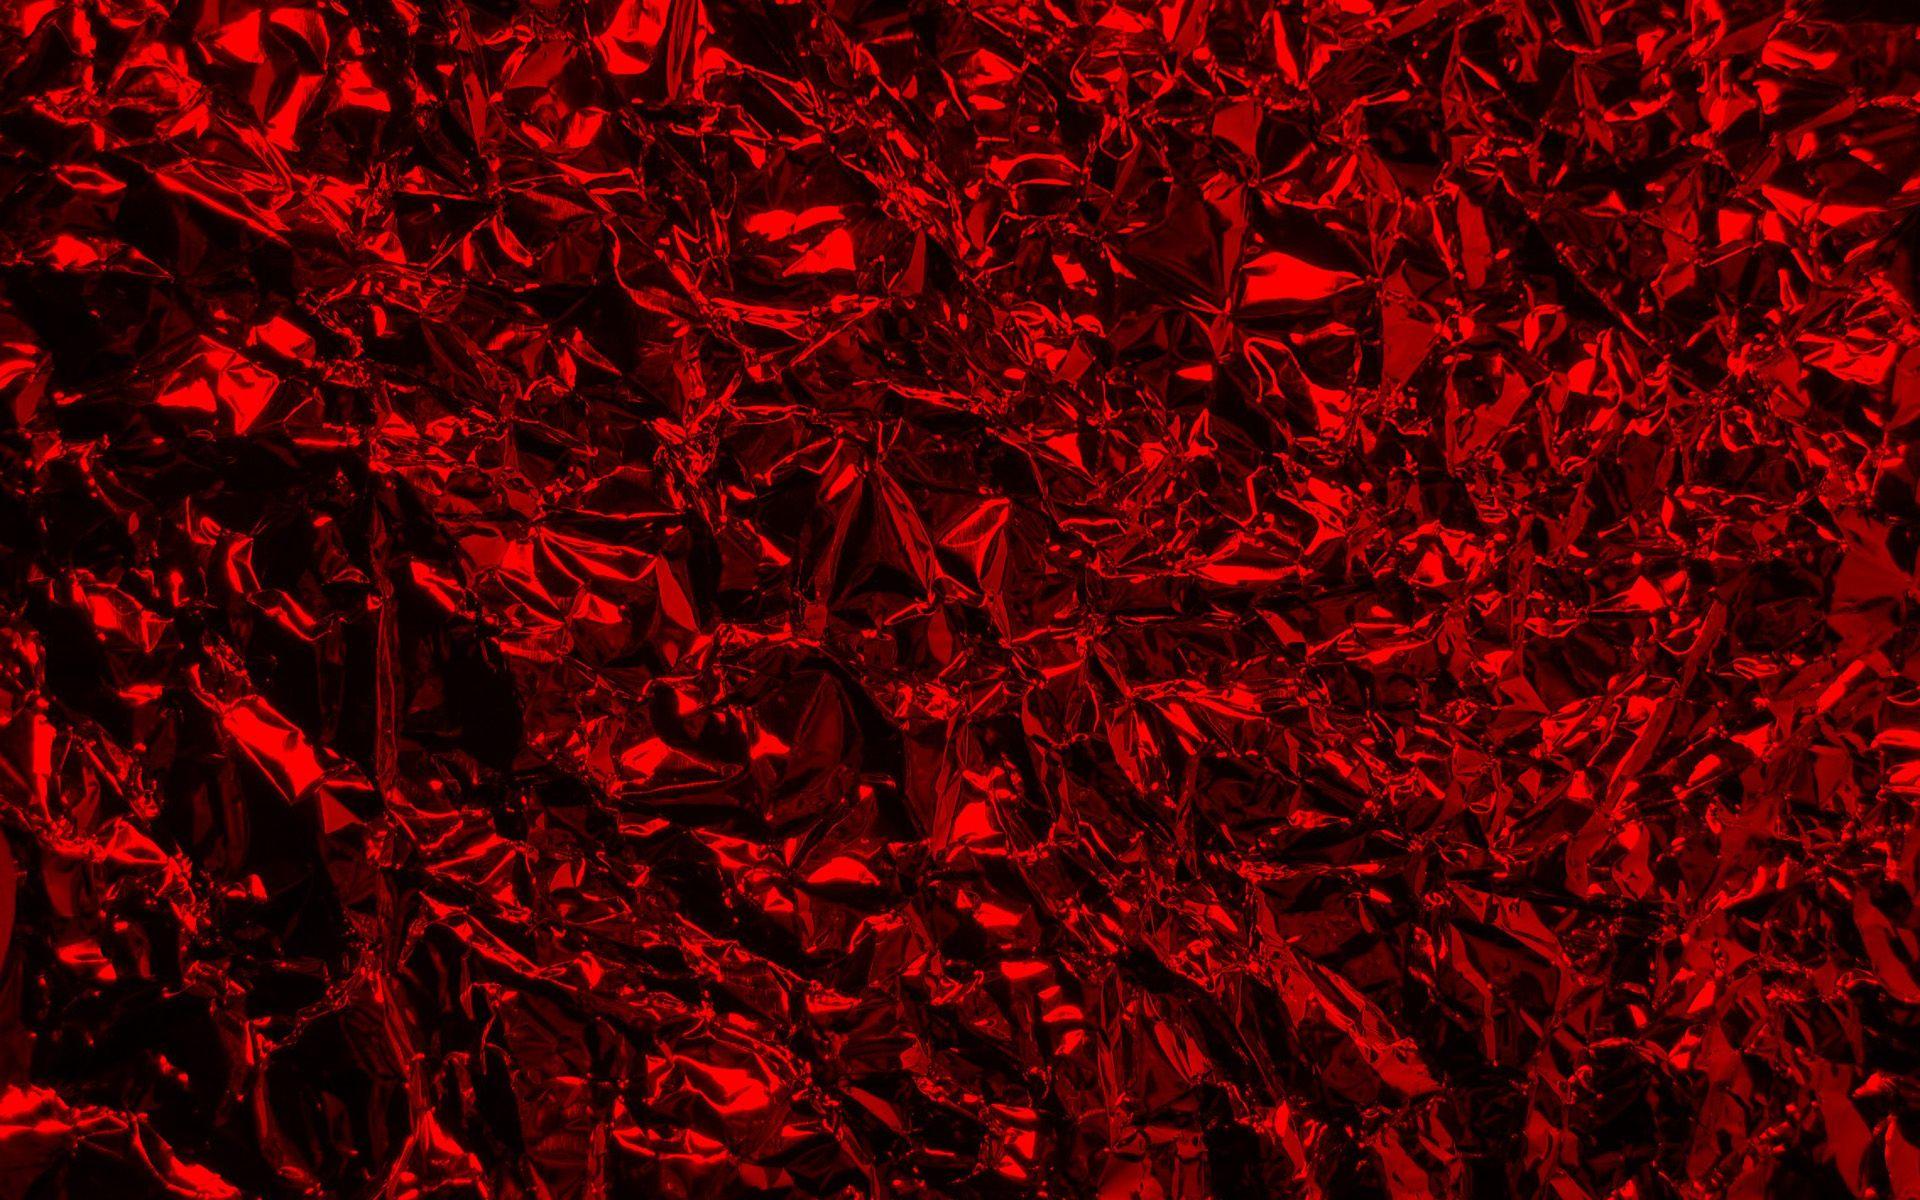 Red Textured Wallpapers - Top Free Red Textured Backgrounds ...